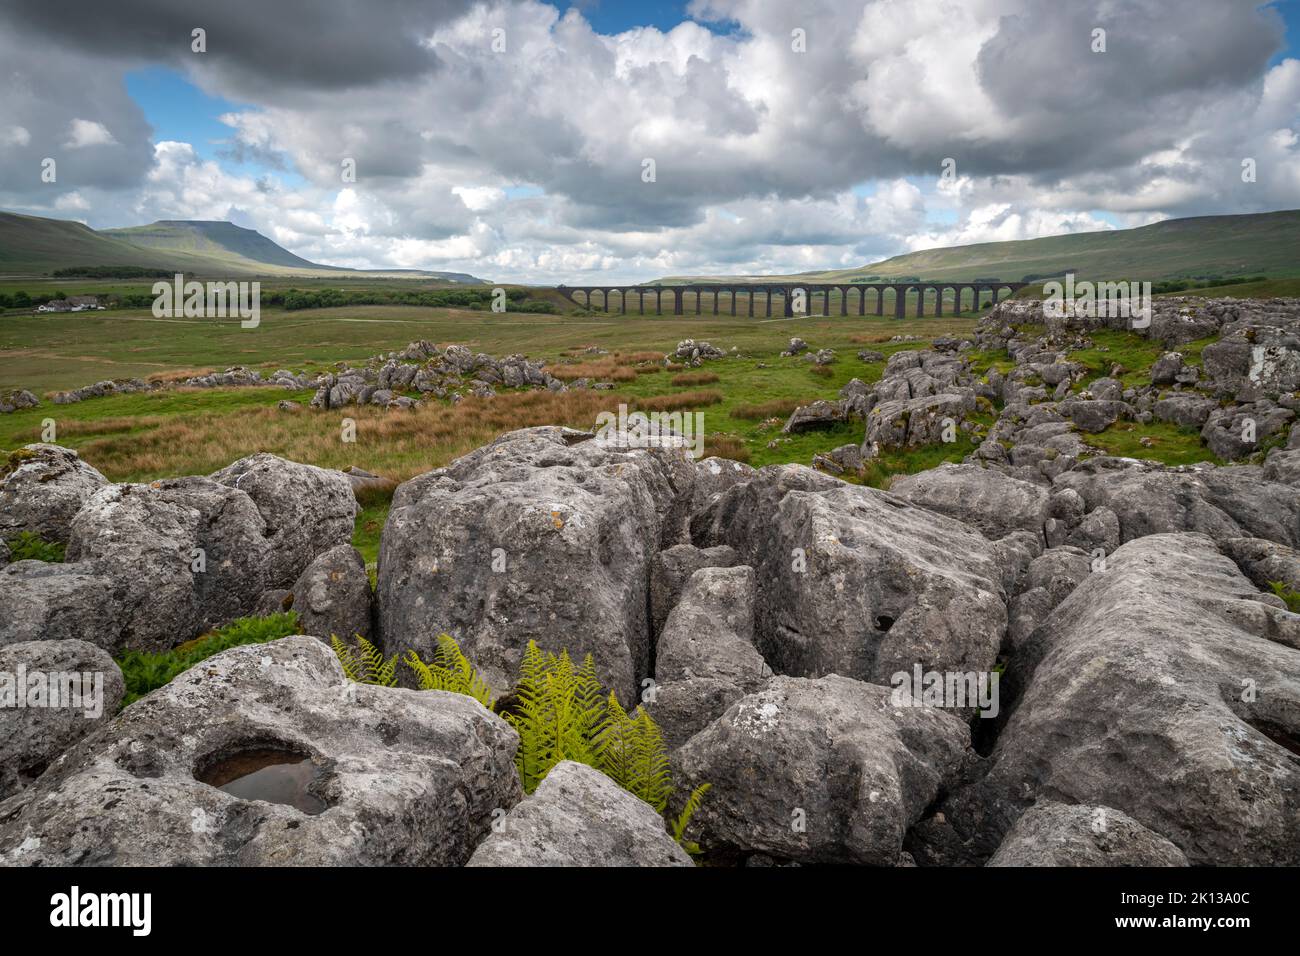 Ribblehead Viaduct in the Yorkshire Dales National Park, North Yorkshire, England, United Kingdom, Europe Stock Photo